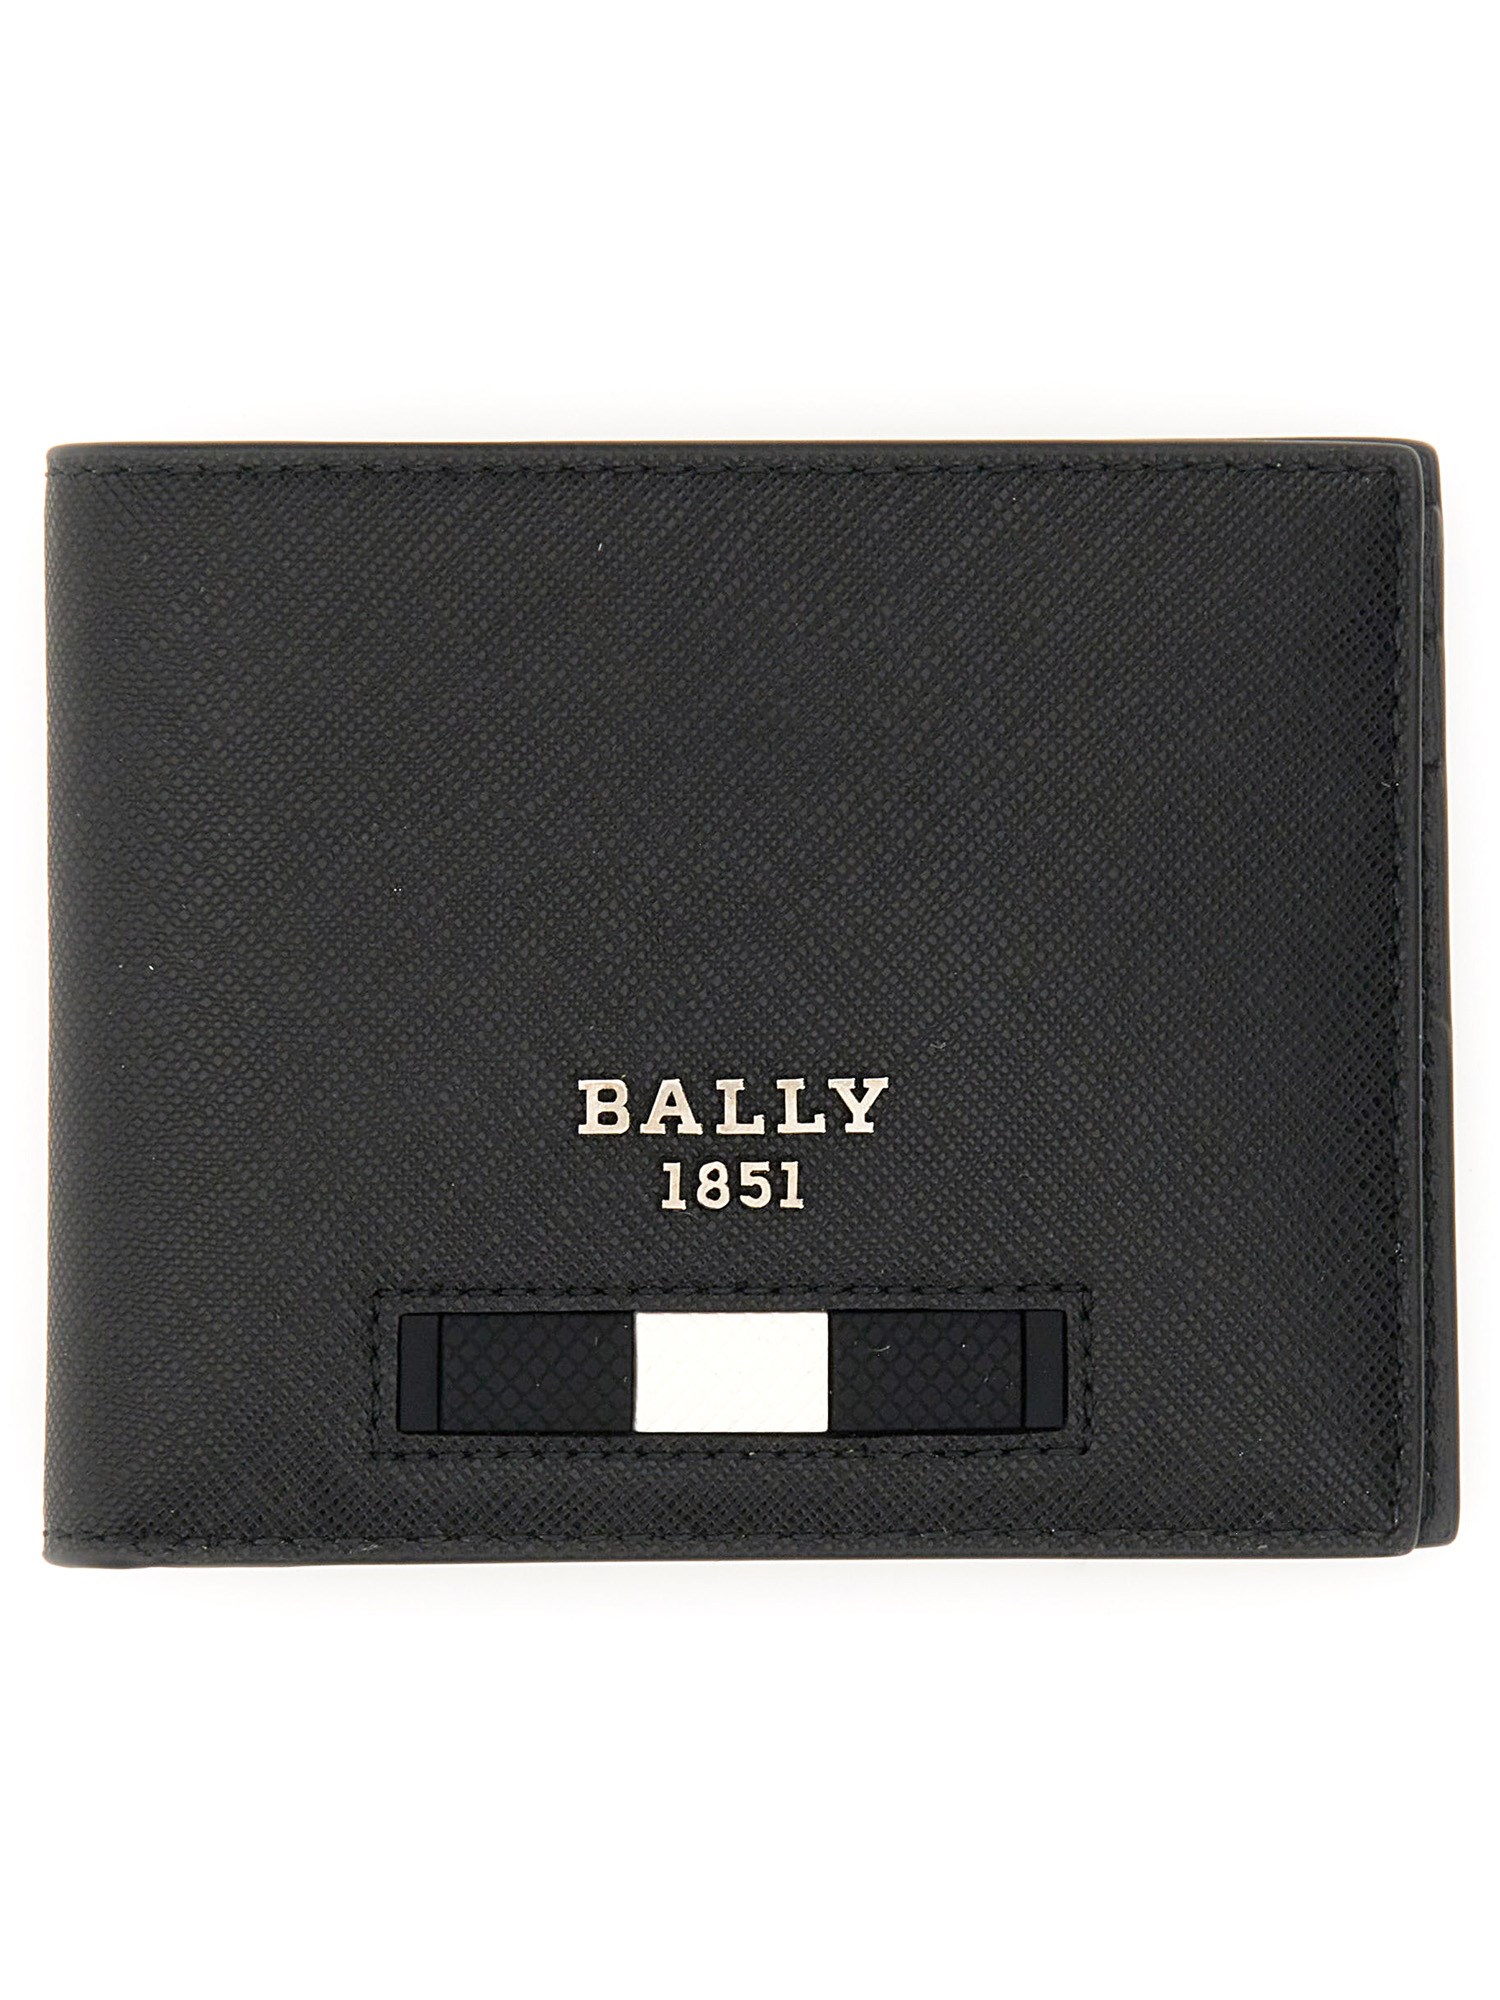 bally leather wallet